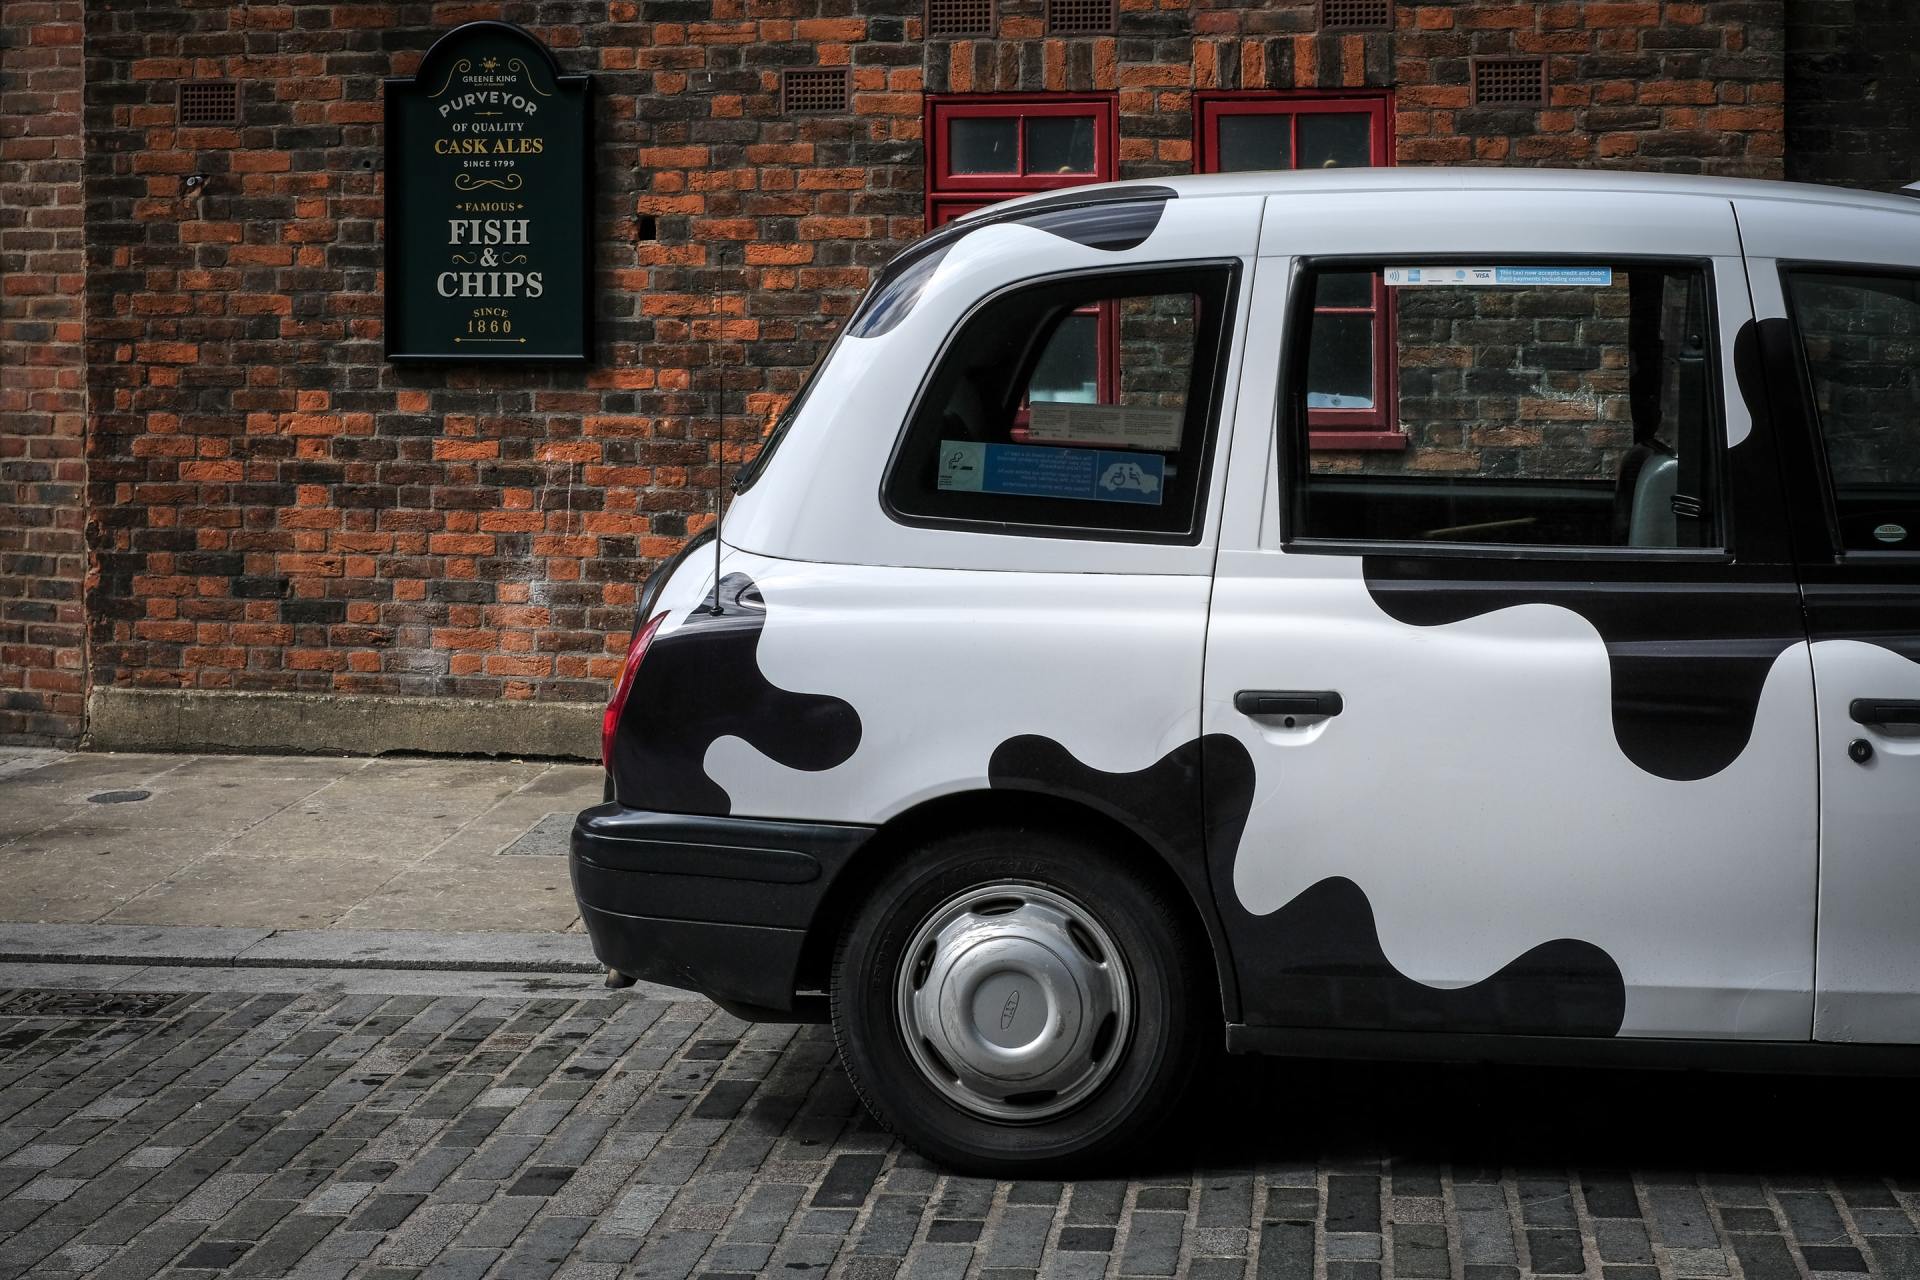 a black and white cow print taxi cab is parked in front of a brick building .